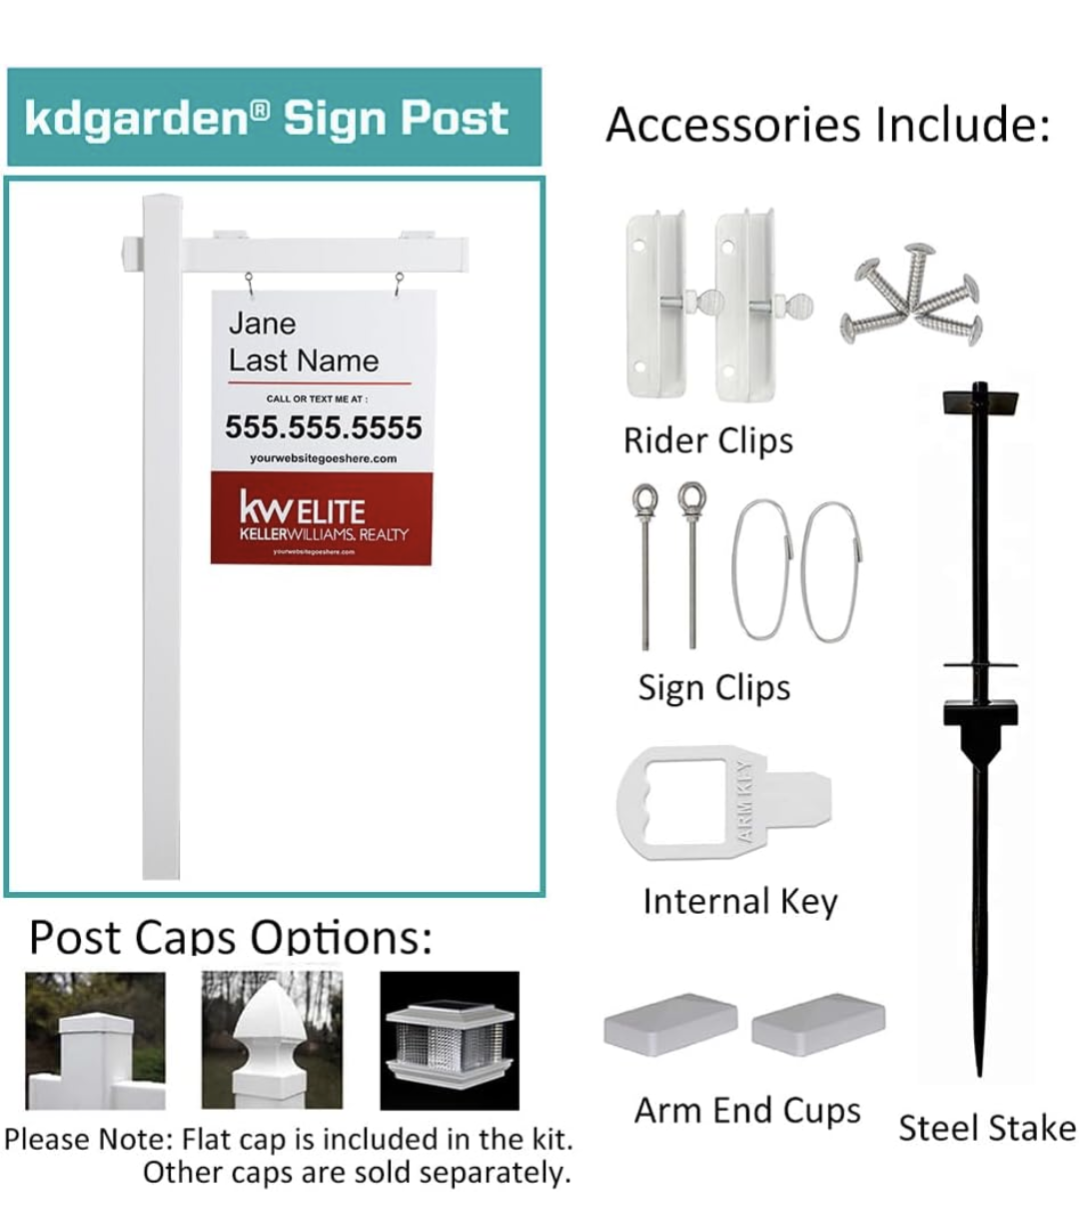 Recommended Buy - Vinyl PVC Real Estate Sign (RJORealtyInvestments.com)